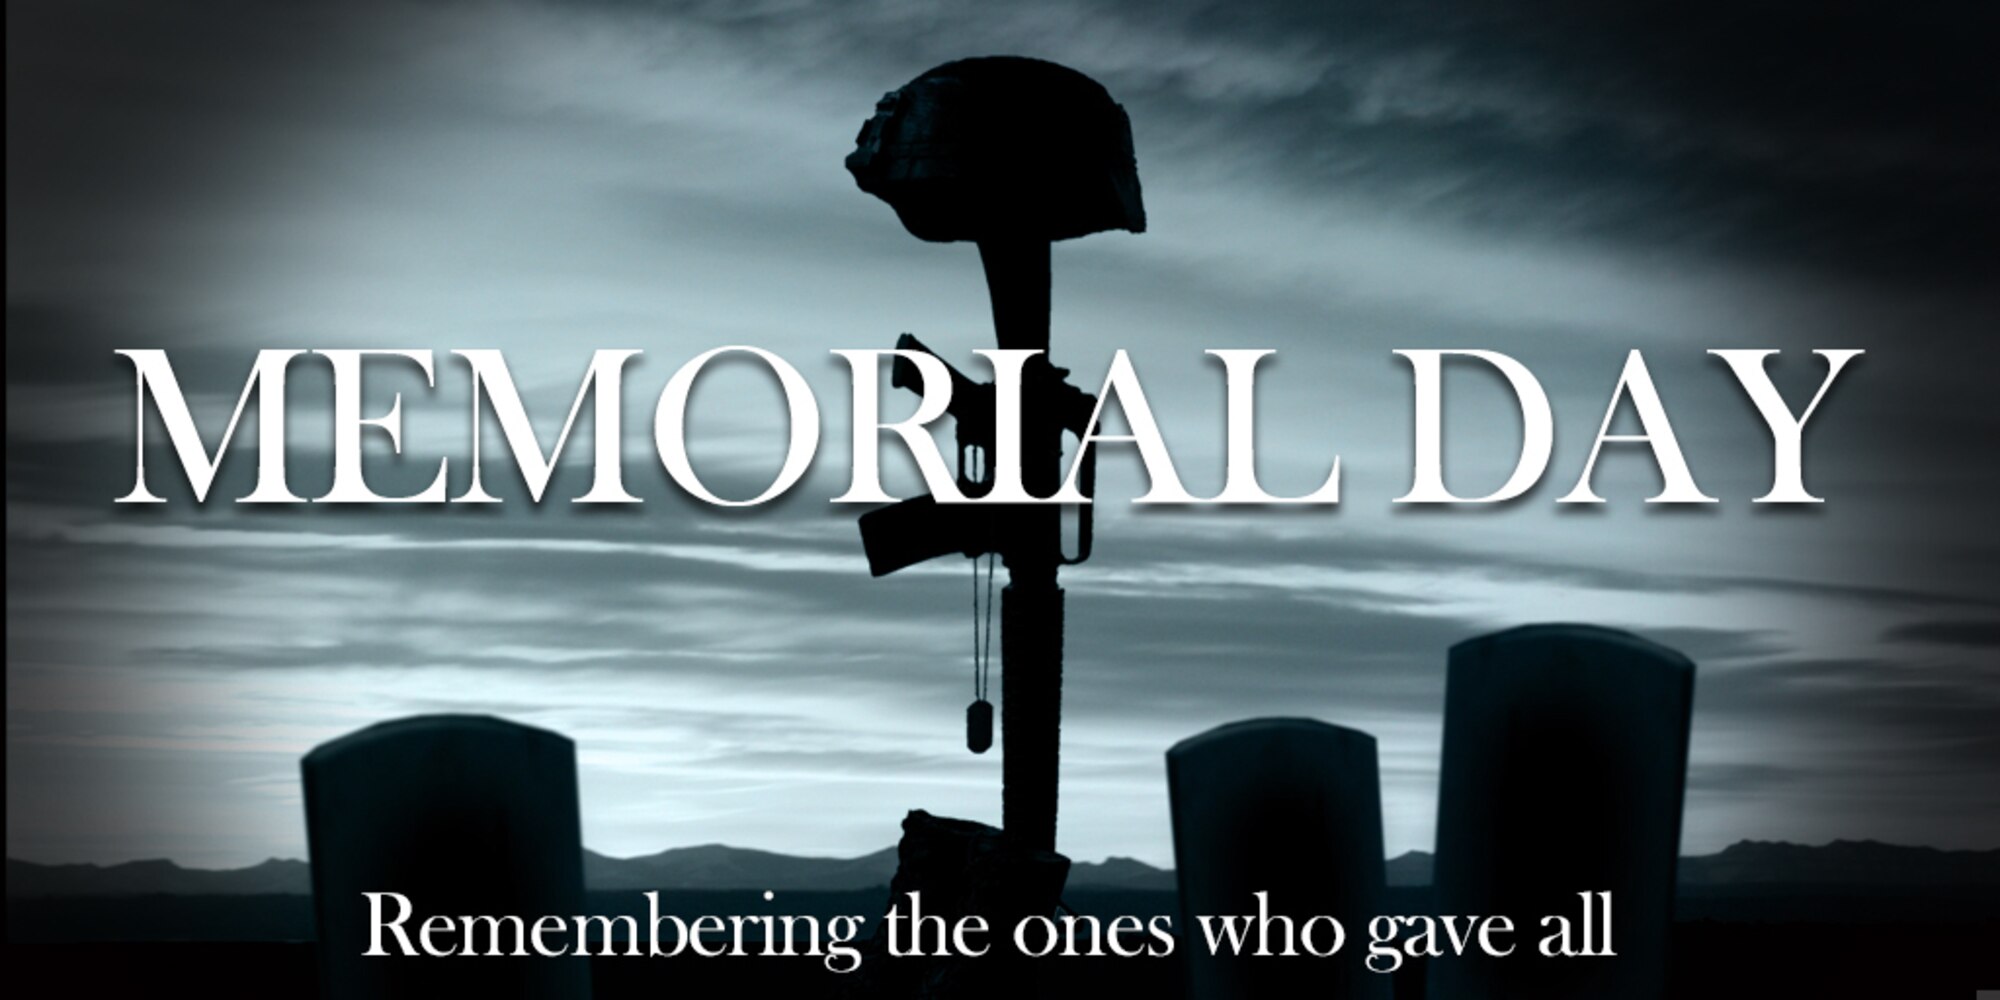 Local Memorial Day observances to honor service members’ sacrifices ...